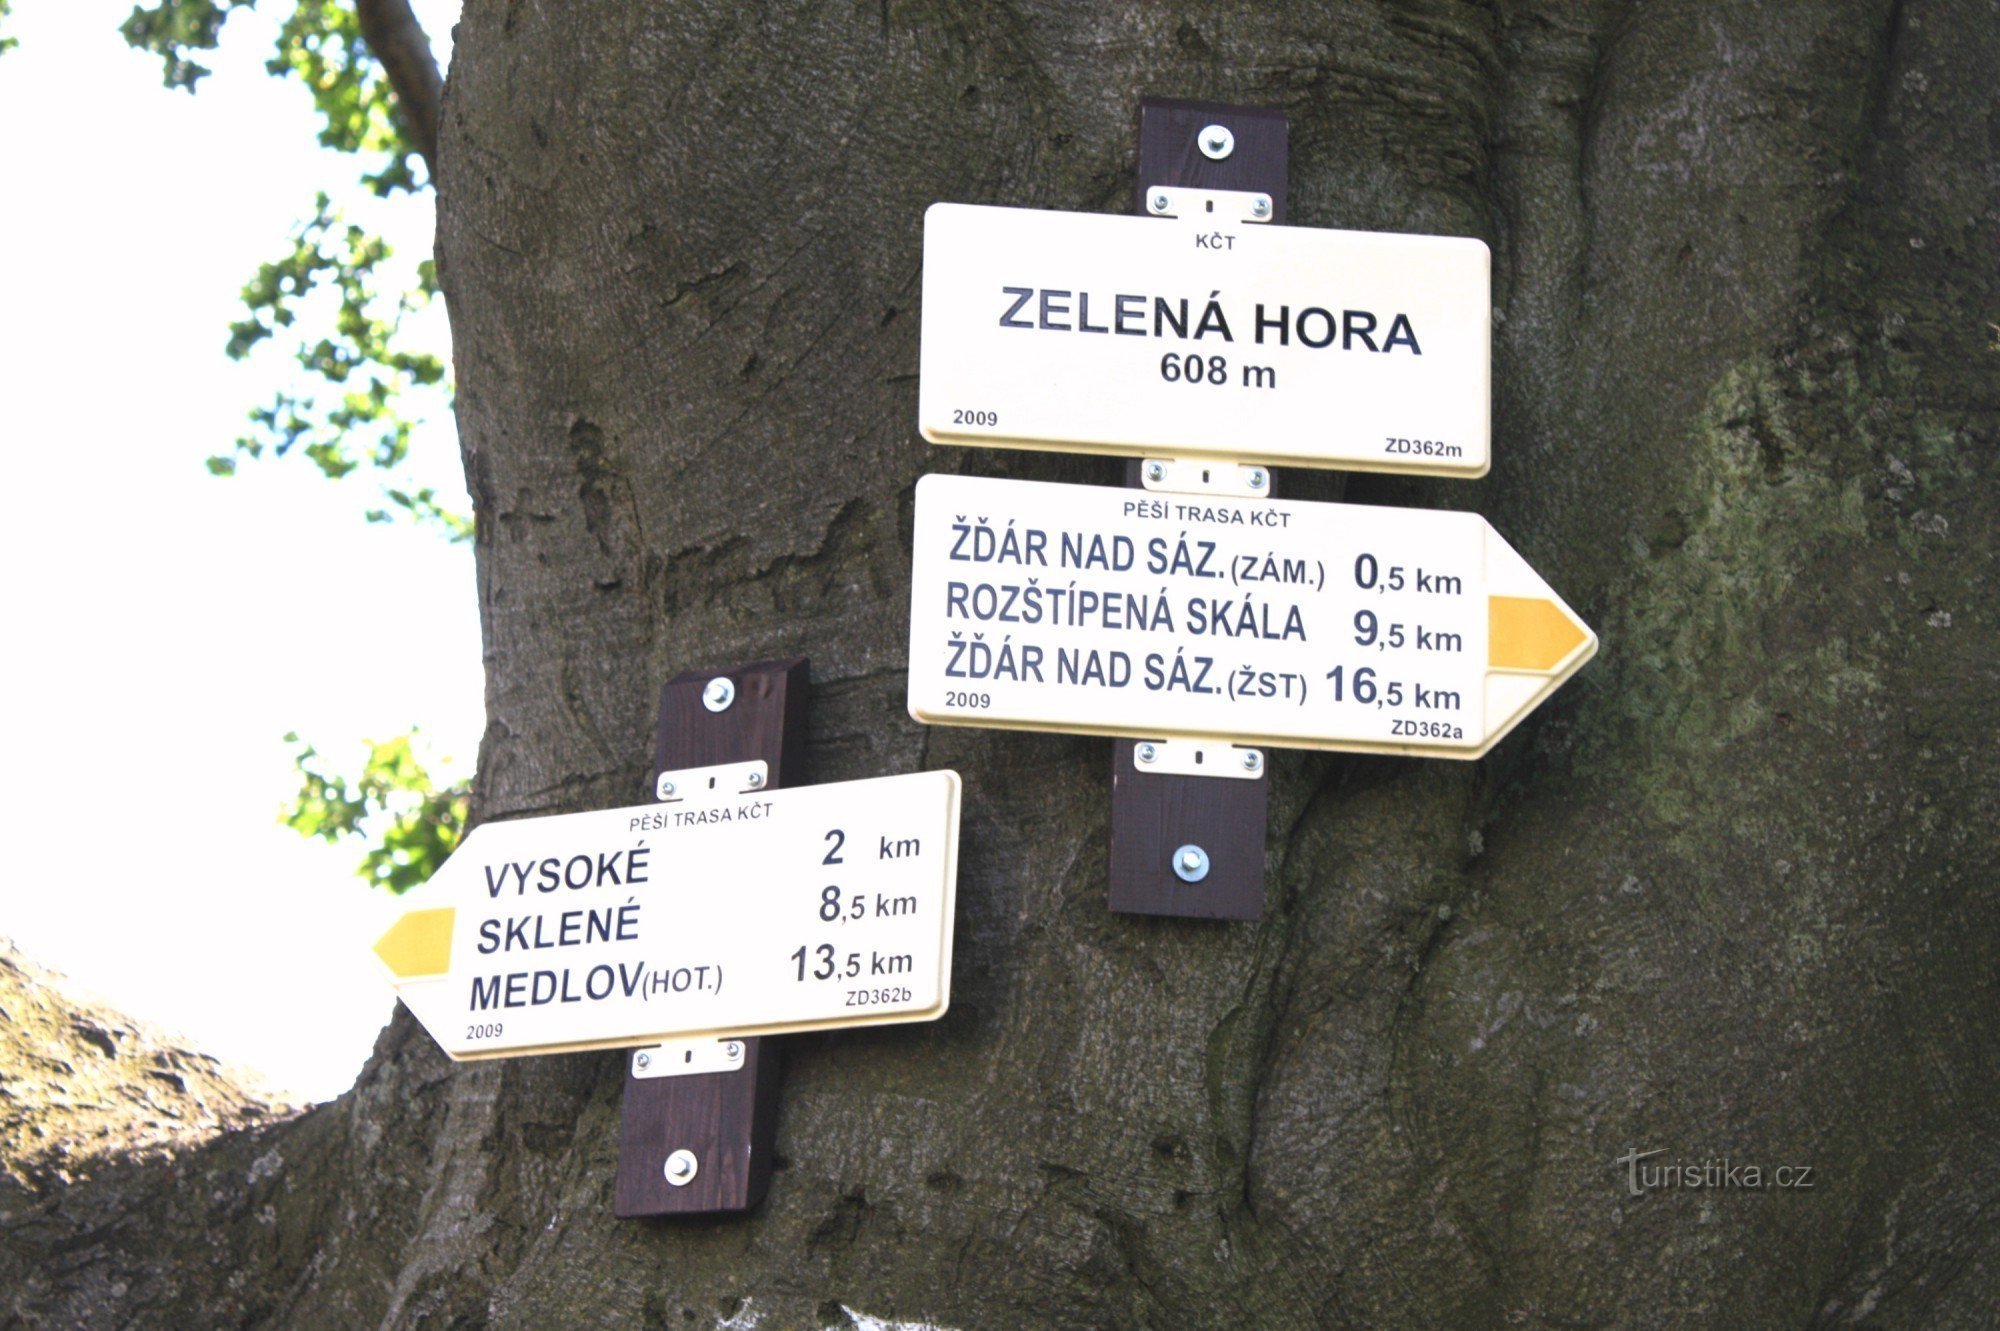 Previously, the turn signals were placed on a sturdy beech tree